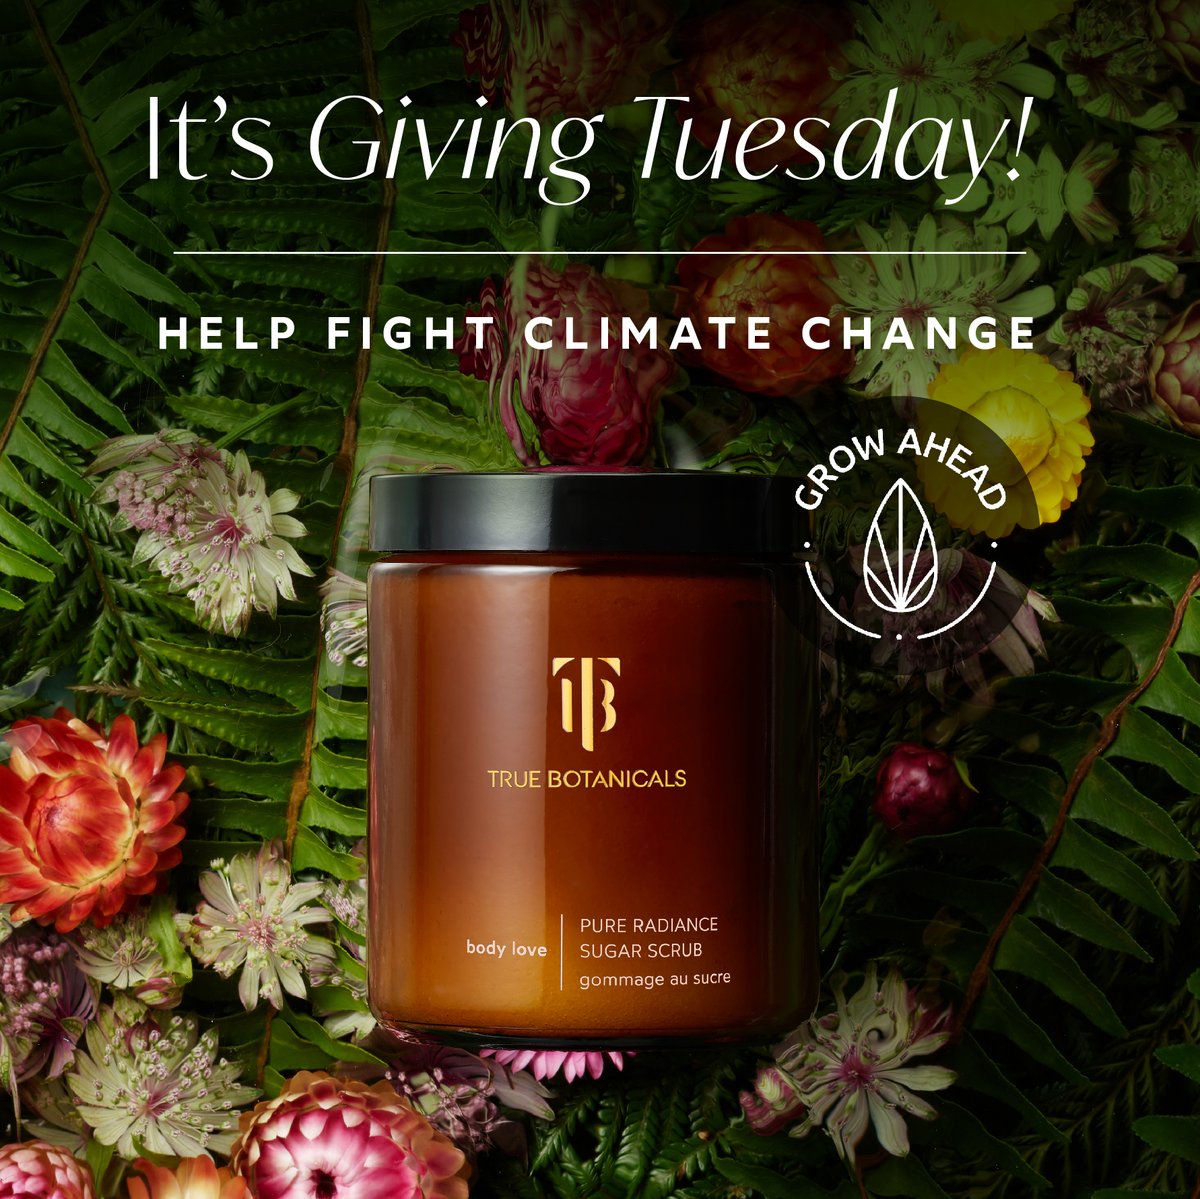 ⭐⭐⭐⭐⭐ “This leaves my skin soft, hydrated and smelling oh-so good!” - Chloe L TODAY ONLY on #GivingTuesday all proceeds from our Pure Radiance Sugar Scrub will be donated to @GrowAhead to support a regenerative farming initiative in Pernambuco, Brazil.